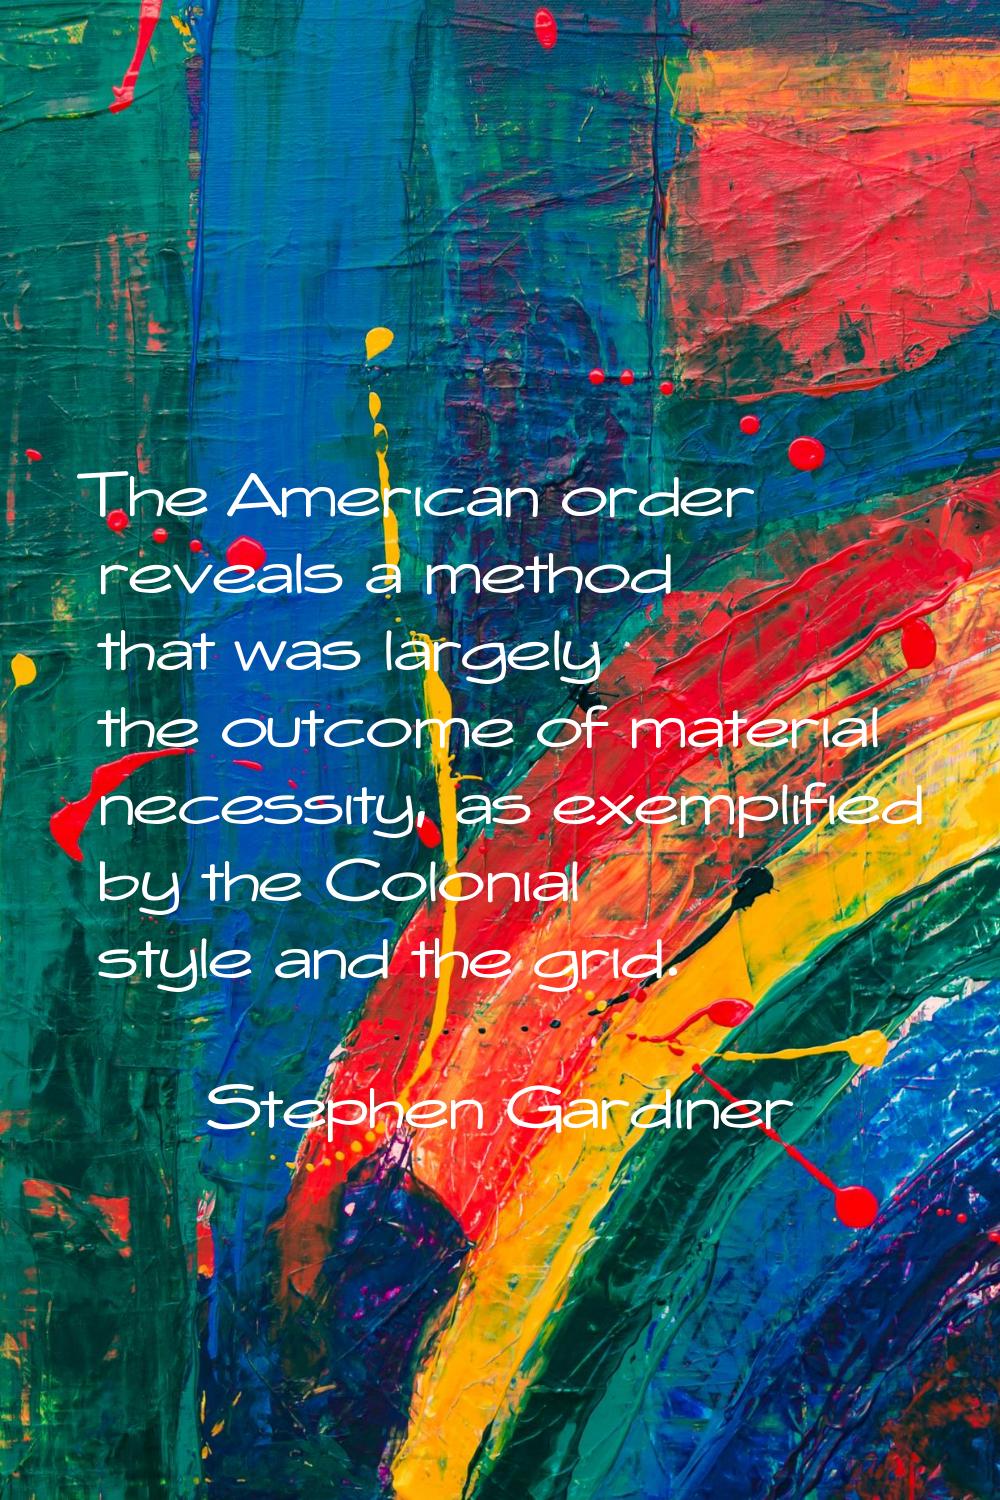 The American order reveals a method that was largely the outcome of material necessity, as exemplif